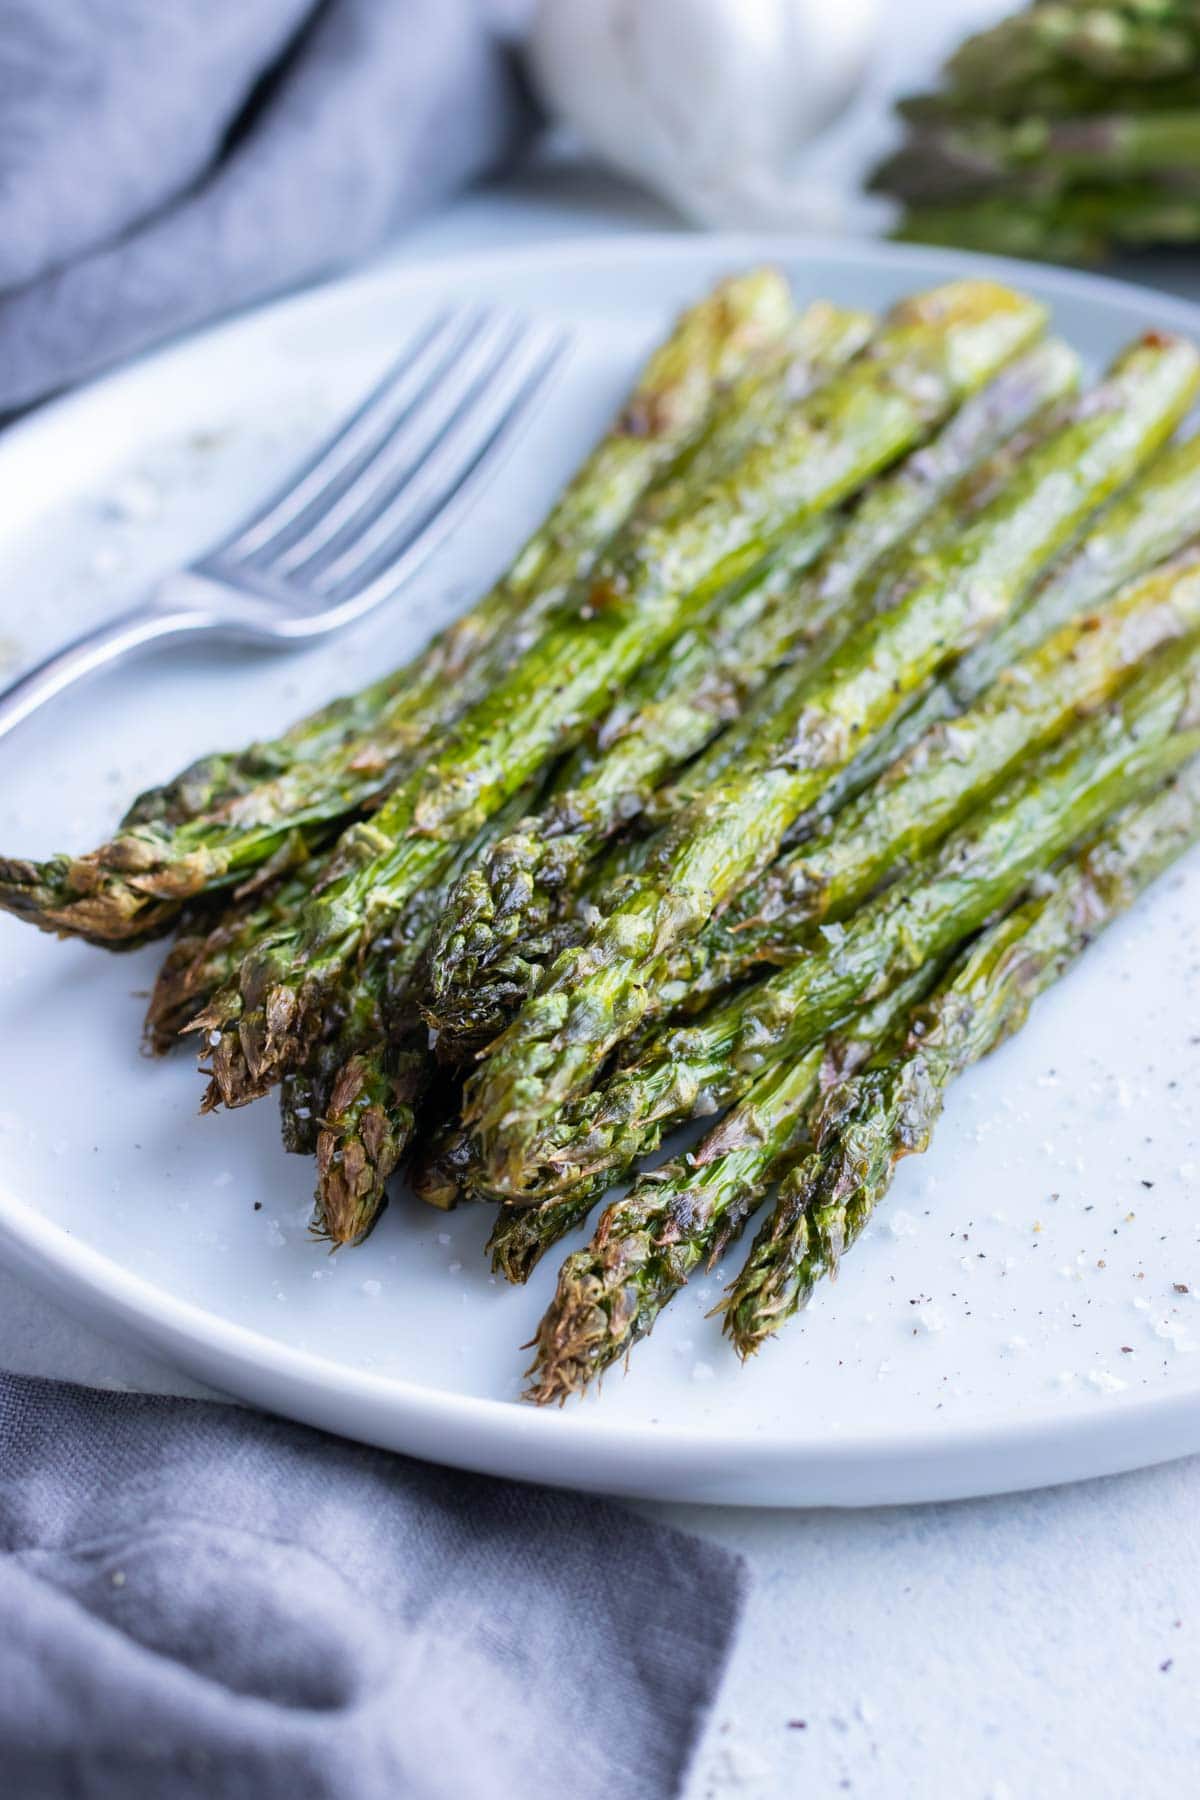 Crispy, low-carb air fryer asparagus is plated for a healthy side.